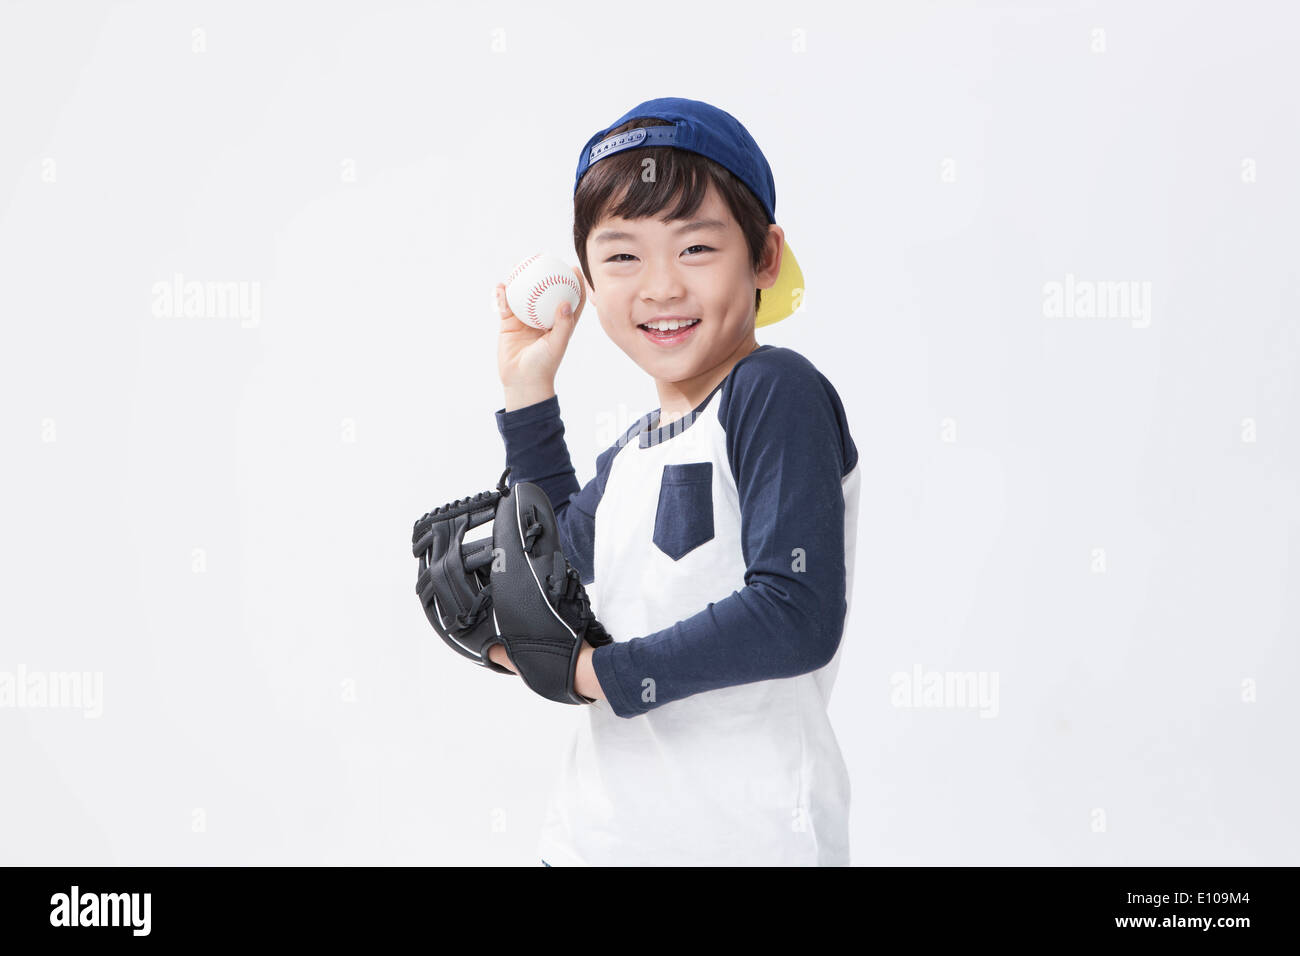 a young boy posing with a baseball mitt and a ball Stock Photo